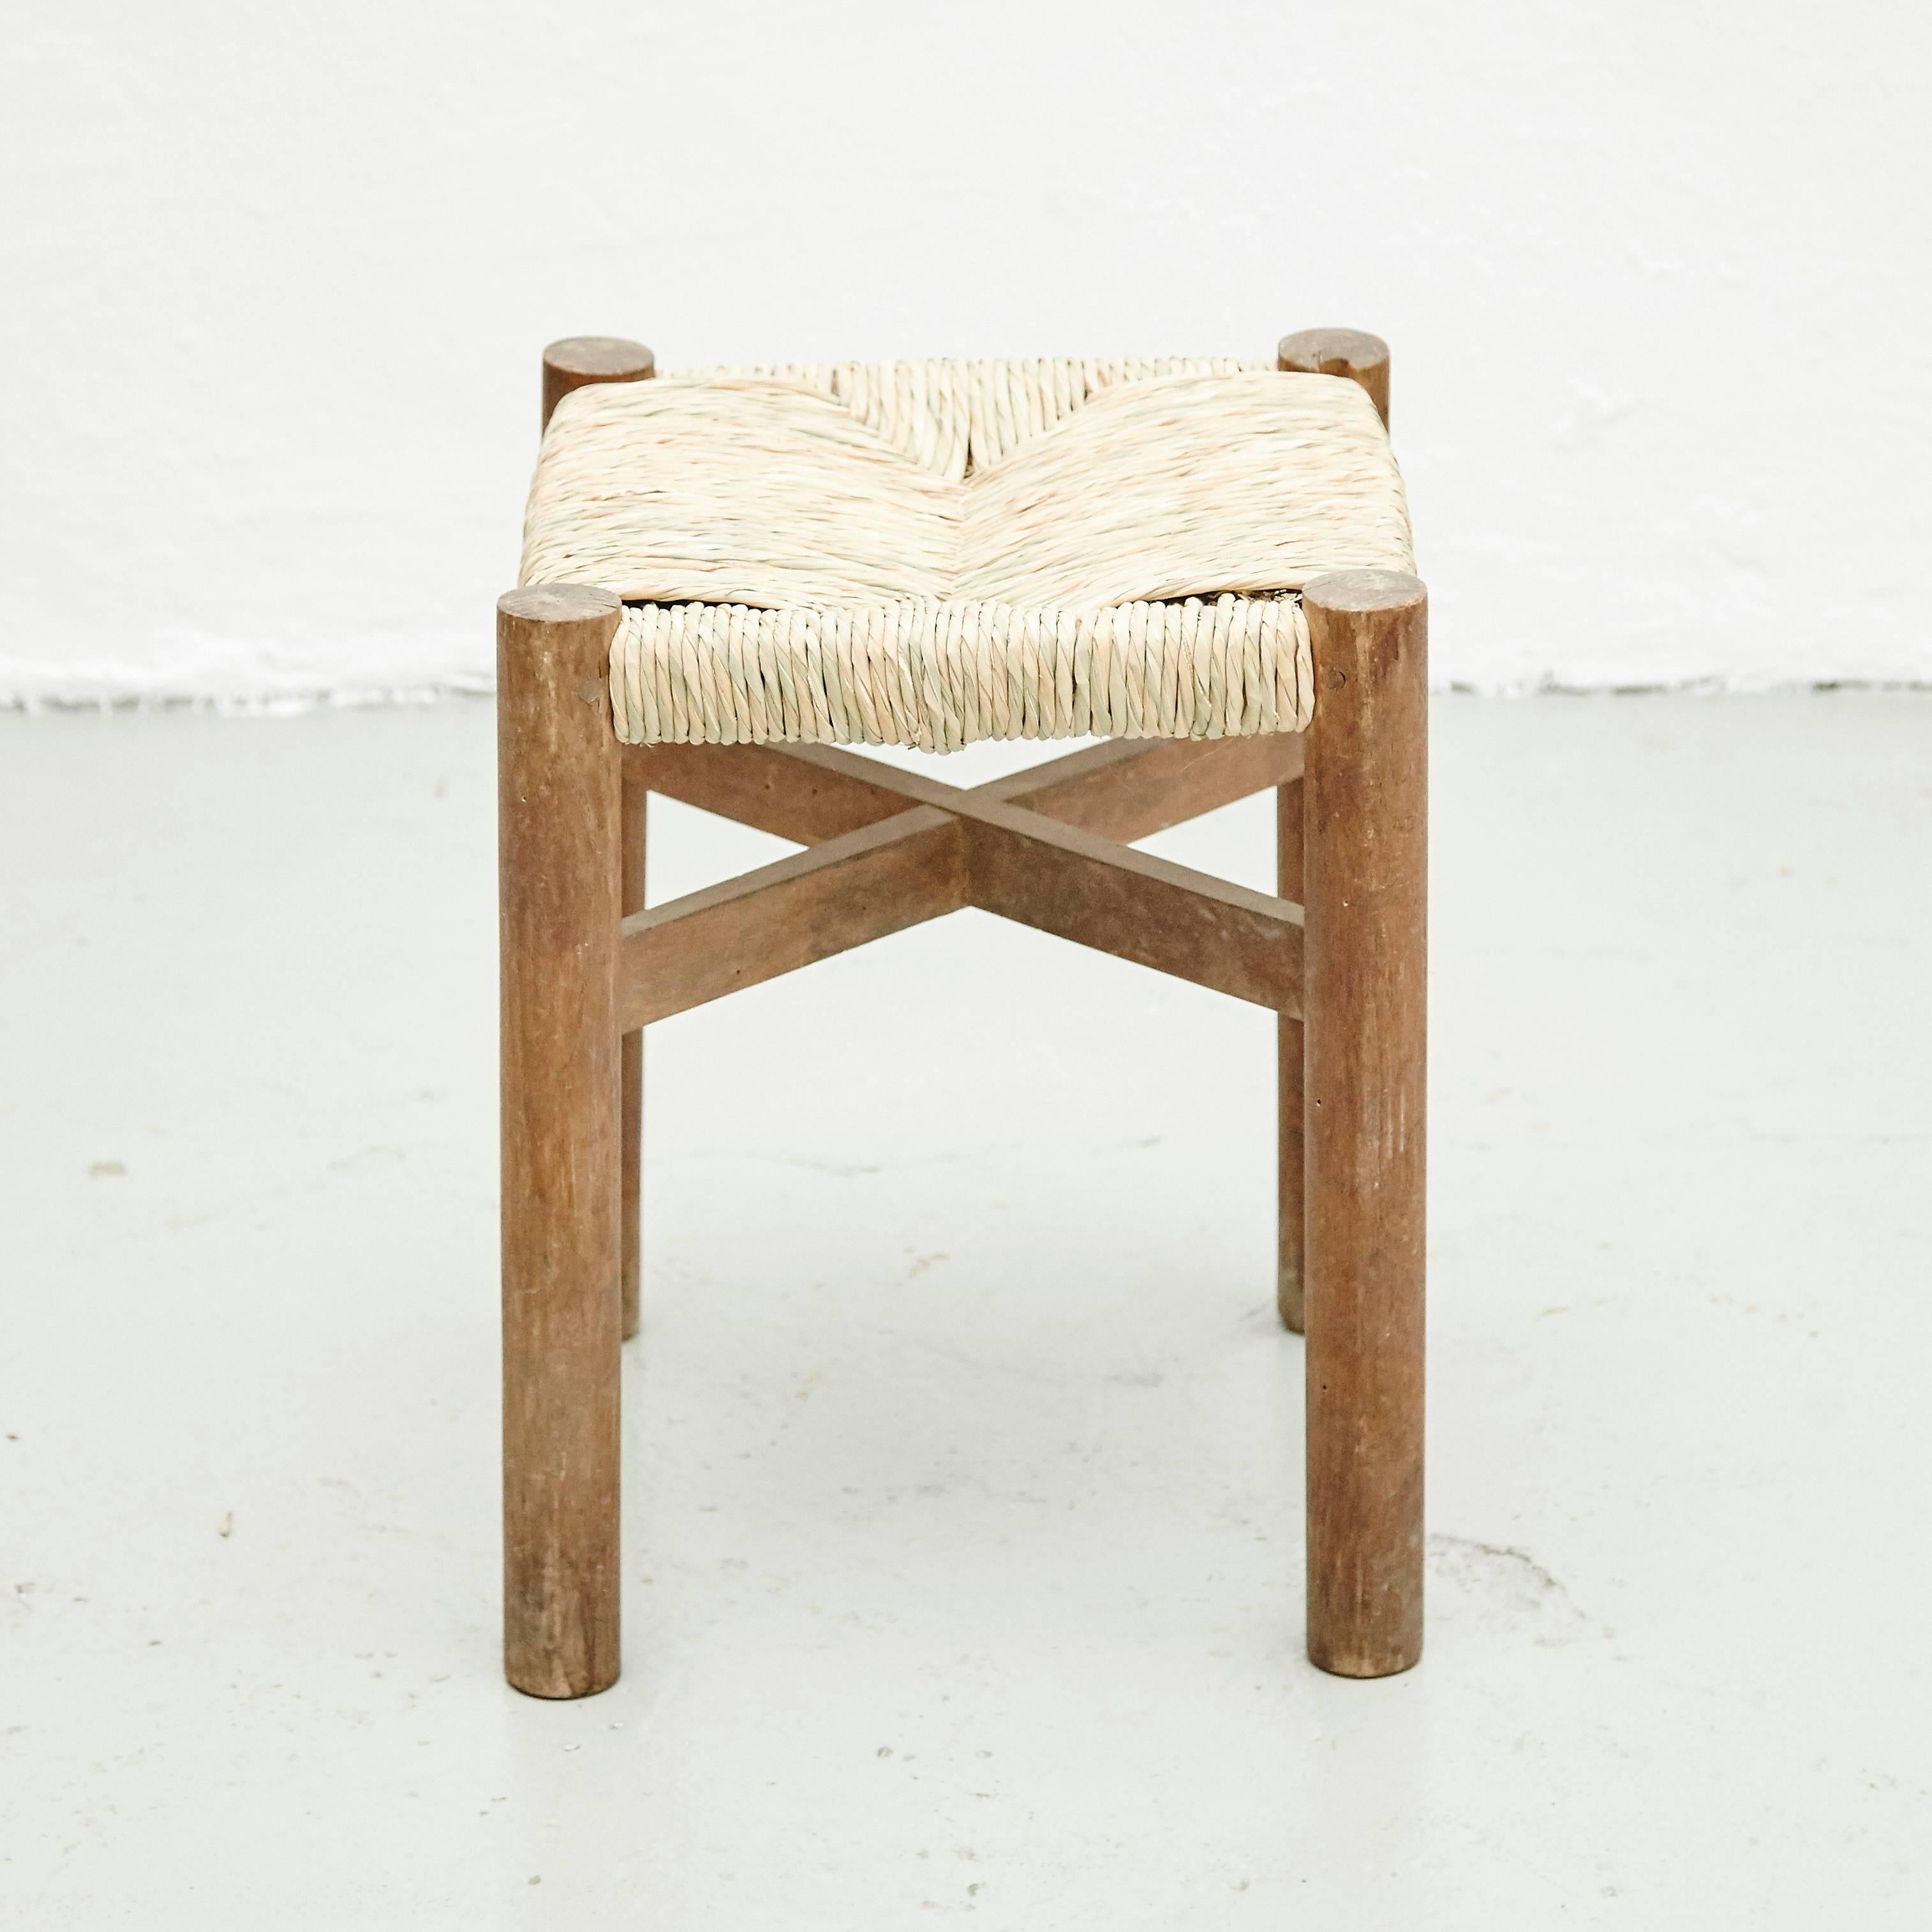 Stool, model Meribel, designed by Charlotte Perriand circa 1950, manufactured in France.
Wood and rattan.

In good condition, with minor wear consistent with age and use.
the rattan seems to be redone some time ago.

We offer fast worldwide shipping